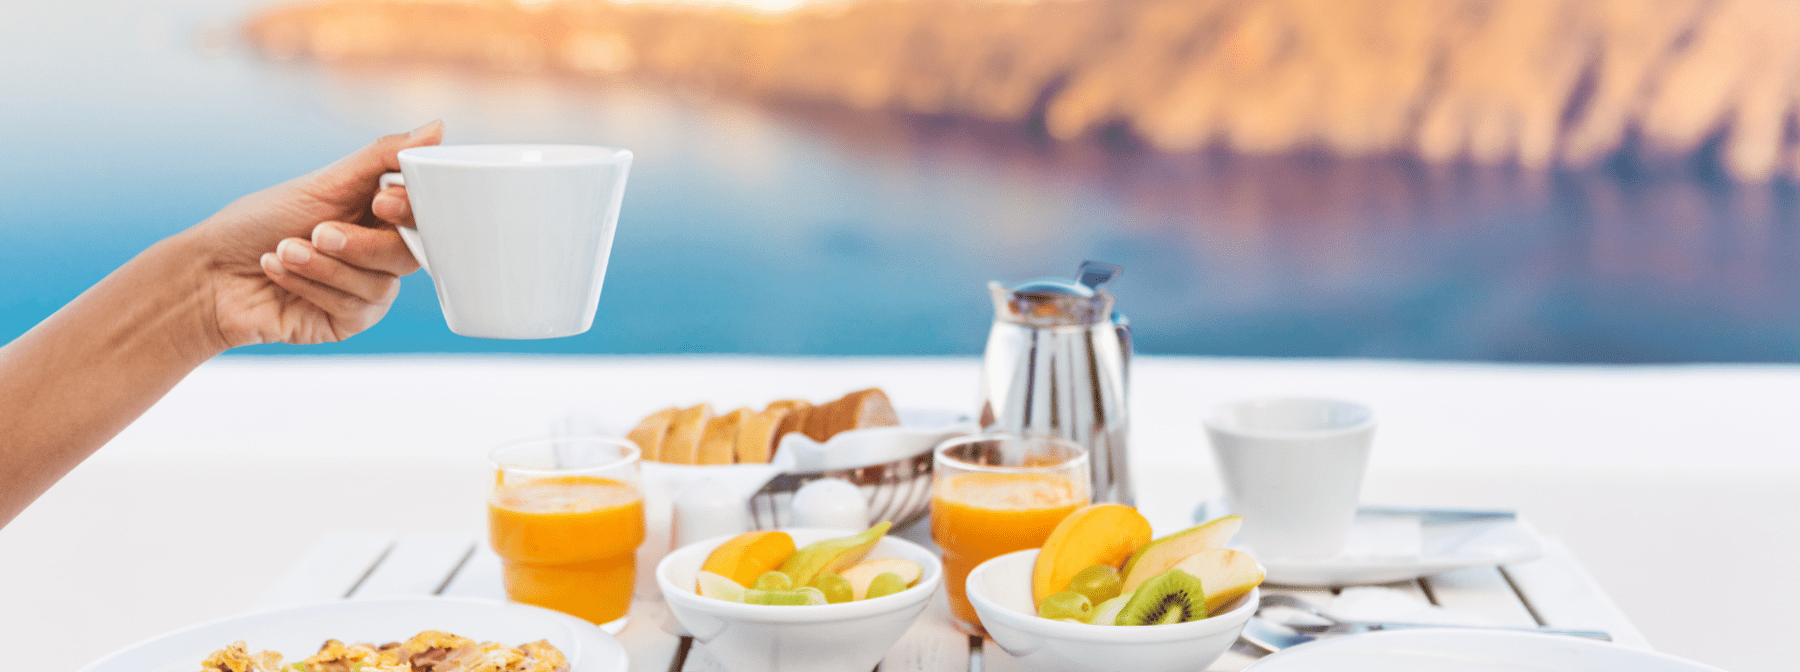 How to Keep Your Diet on Track While on Vacation